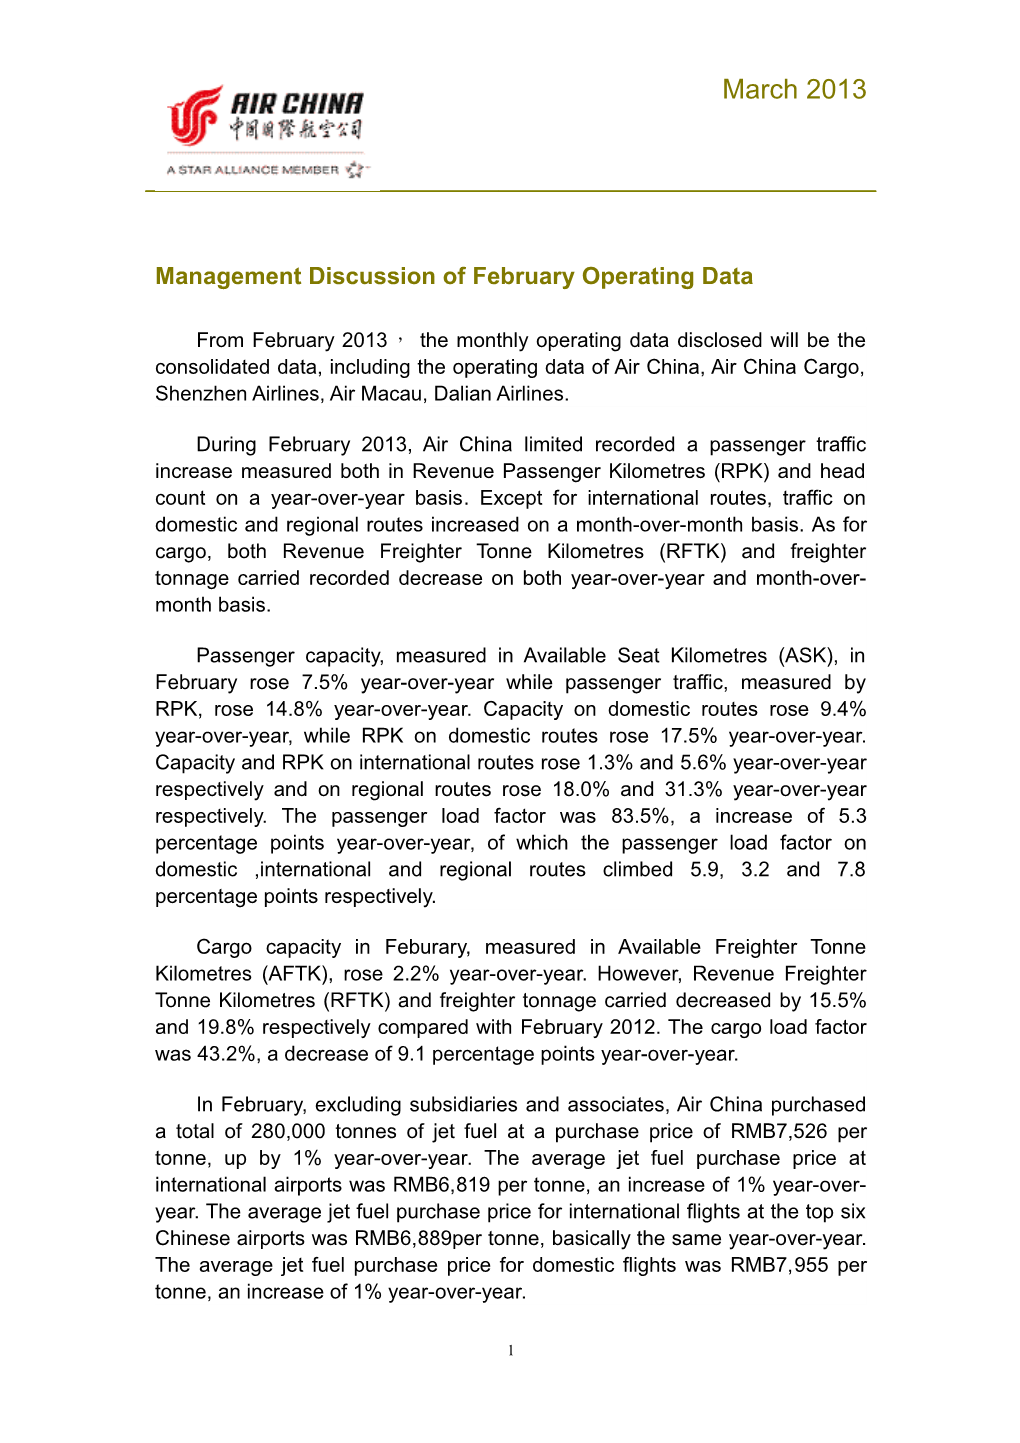 Management Discussion of February Operating Data